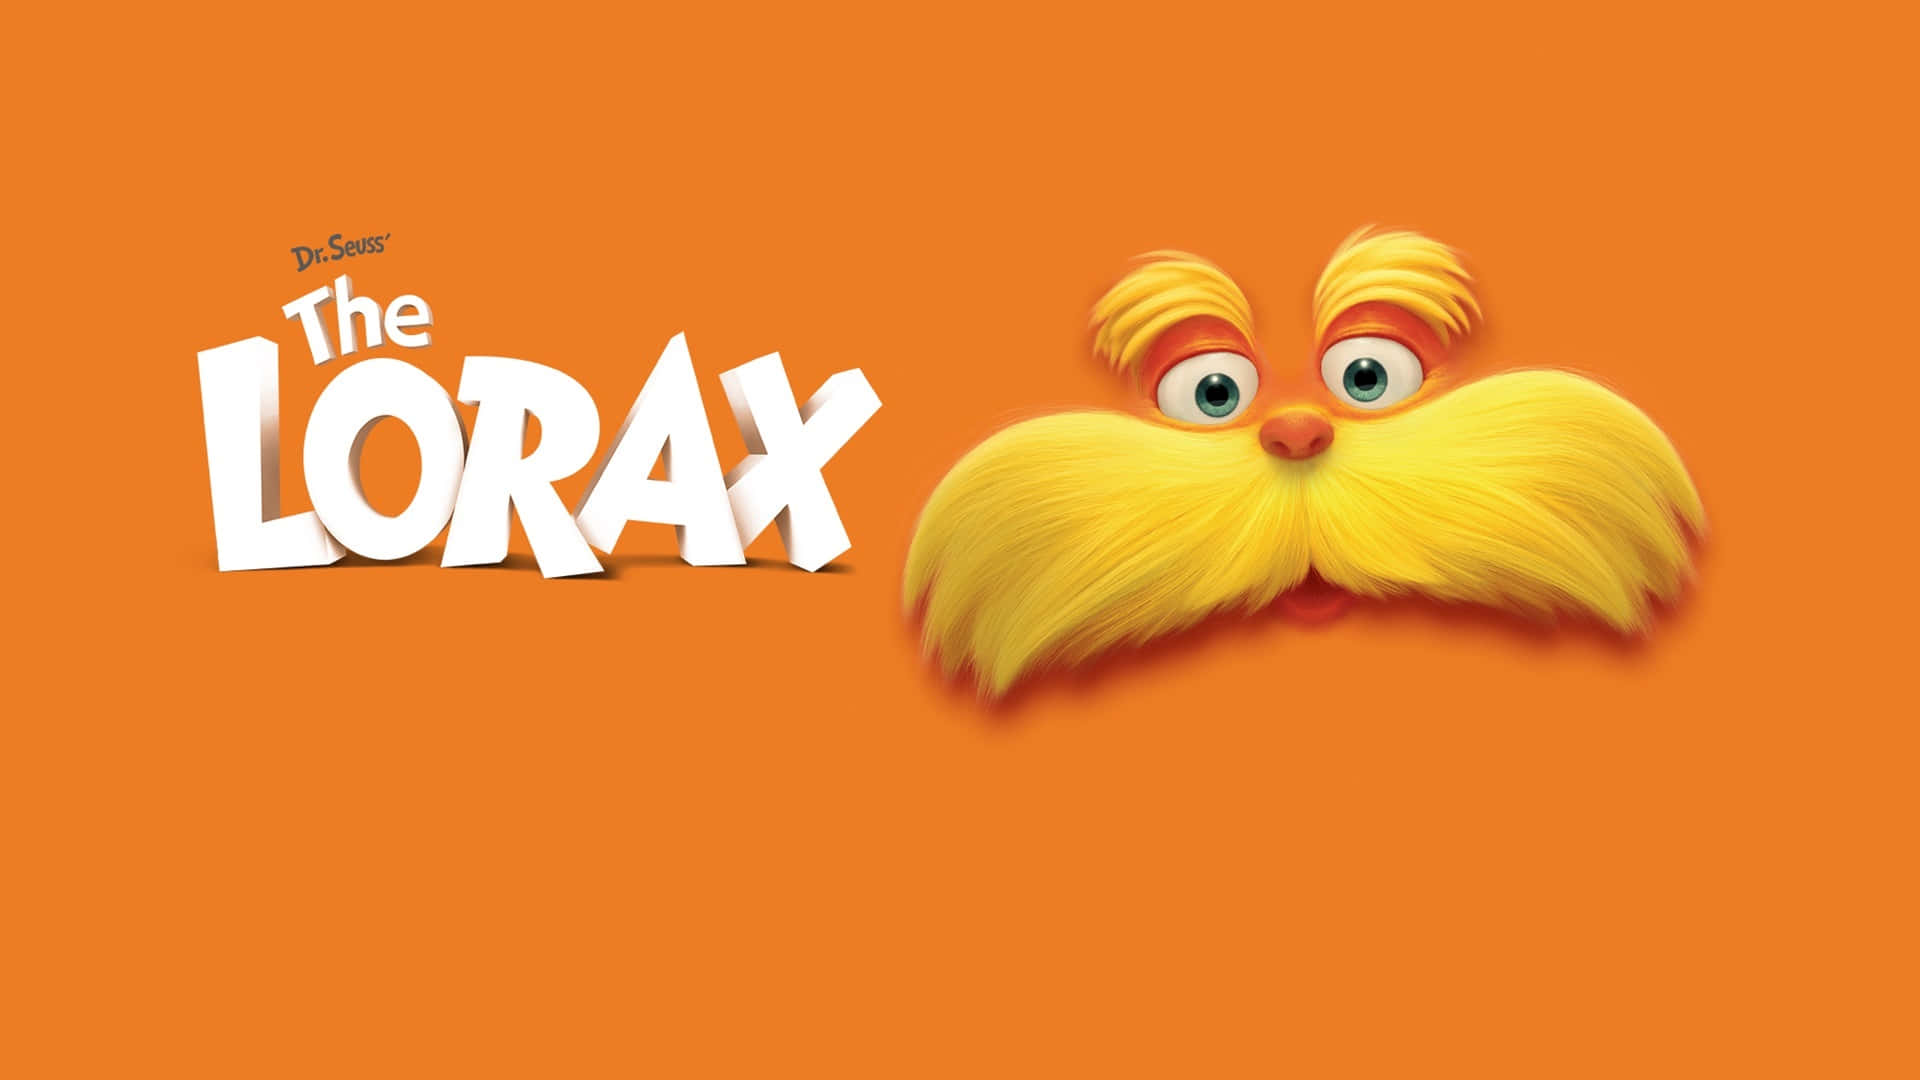 The Lorax Movie Titleand Character Wallpaper